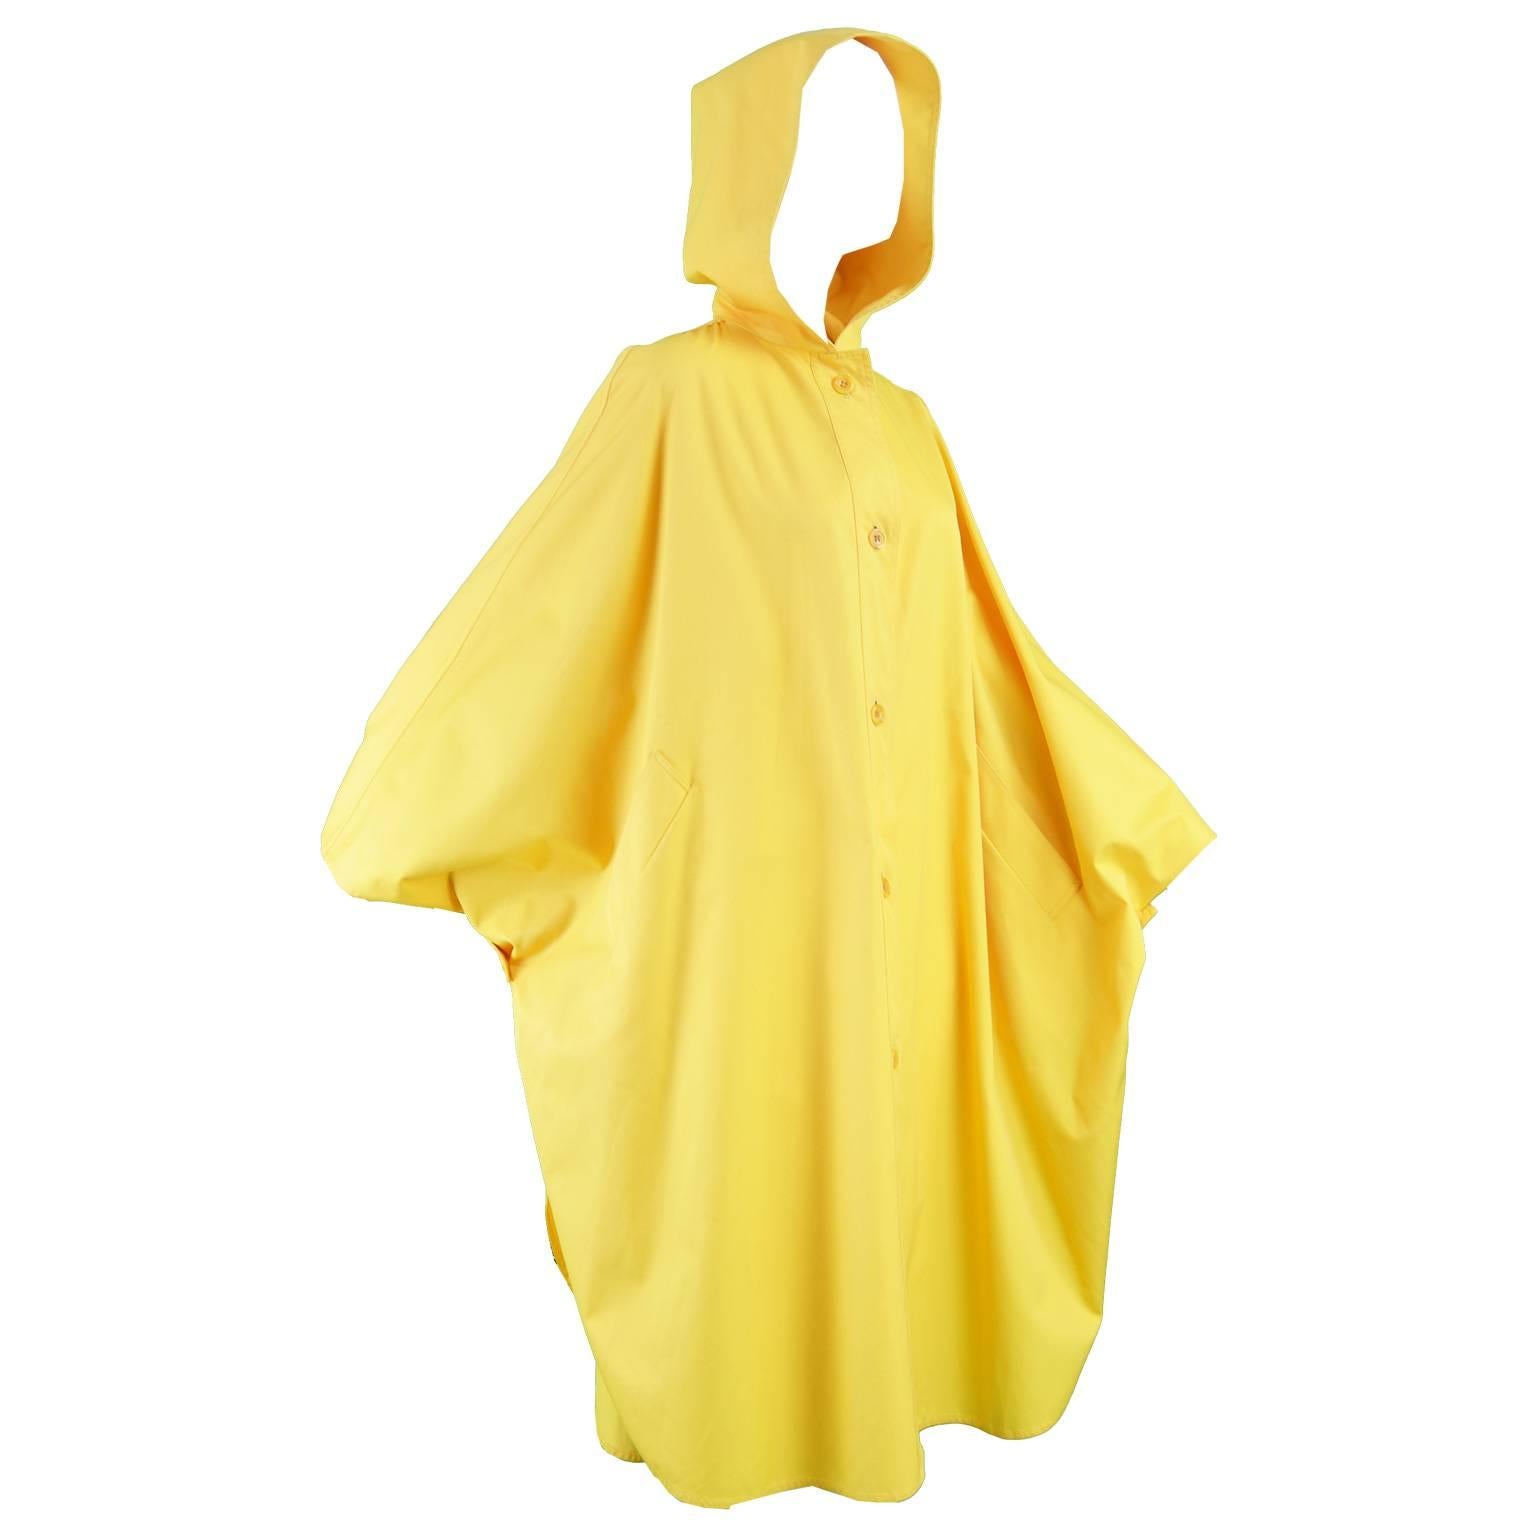 Aquascutum Vintage Mustard Yellow Hooded Trench Cape Coat, 1980s 